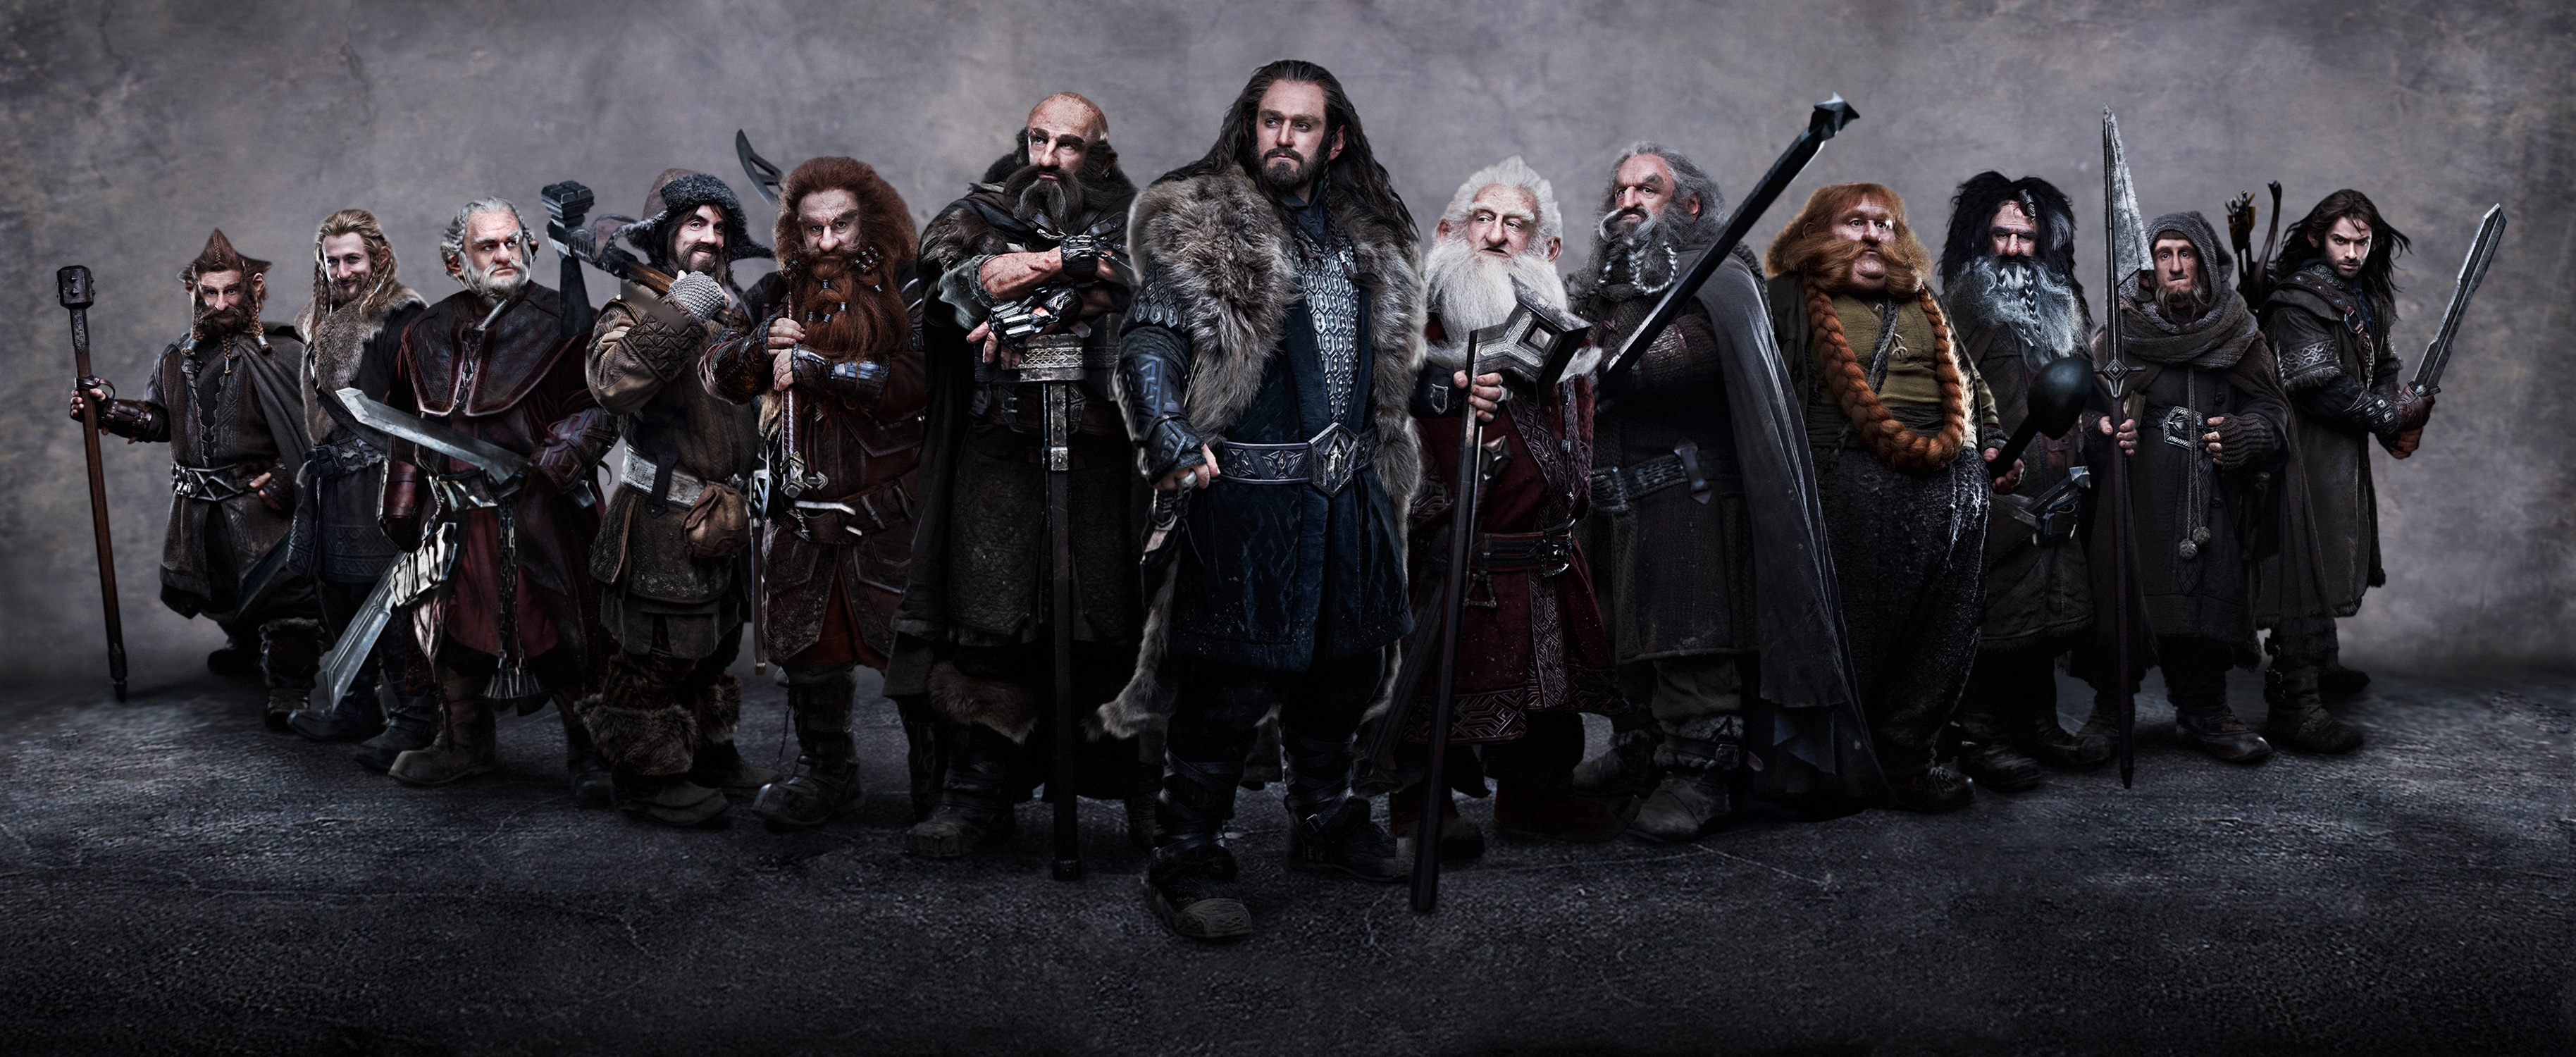 All 13 Dwarves Peter Jackson THE HOBBIT AN UNEXPECTED JOURNEY